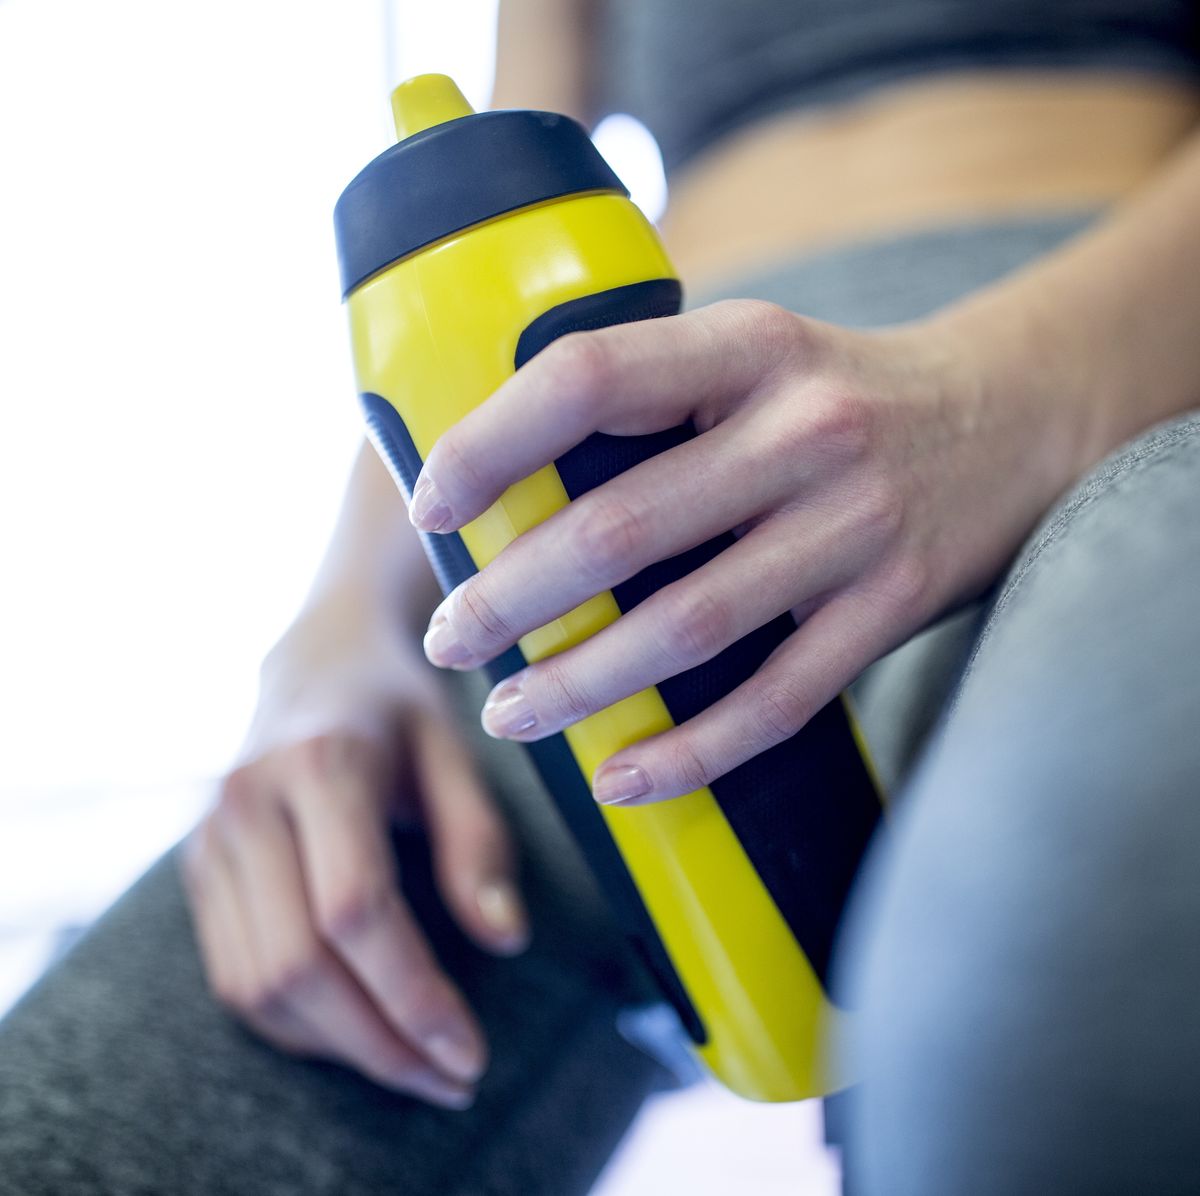 https://hips.hearstapps.com/hmg-prod/images/woman-holding-water-bottle-in-gym-royalty-free-image-670886193-1546447760.jpg?crop=0.669xw:1.00xh;0.166xw,0&resize=1200:*